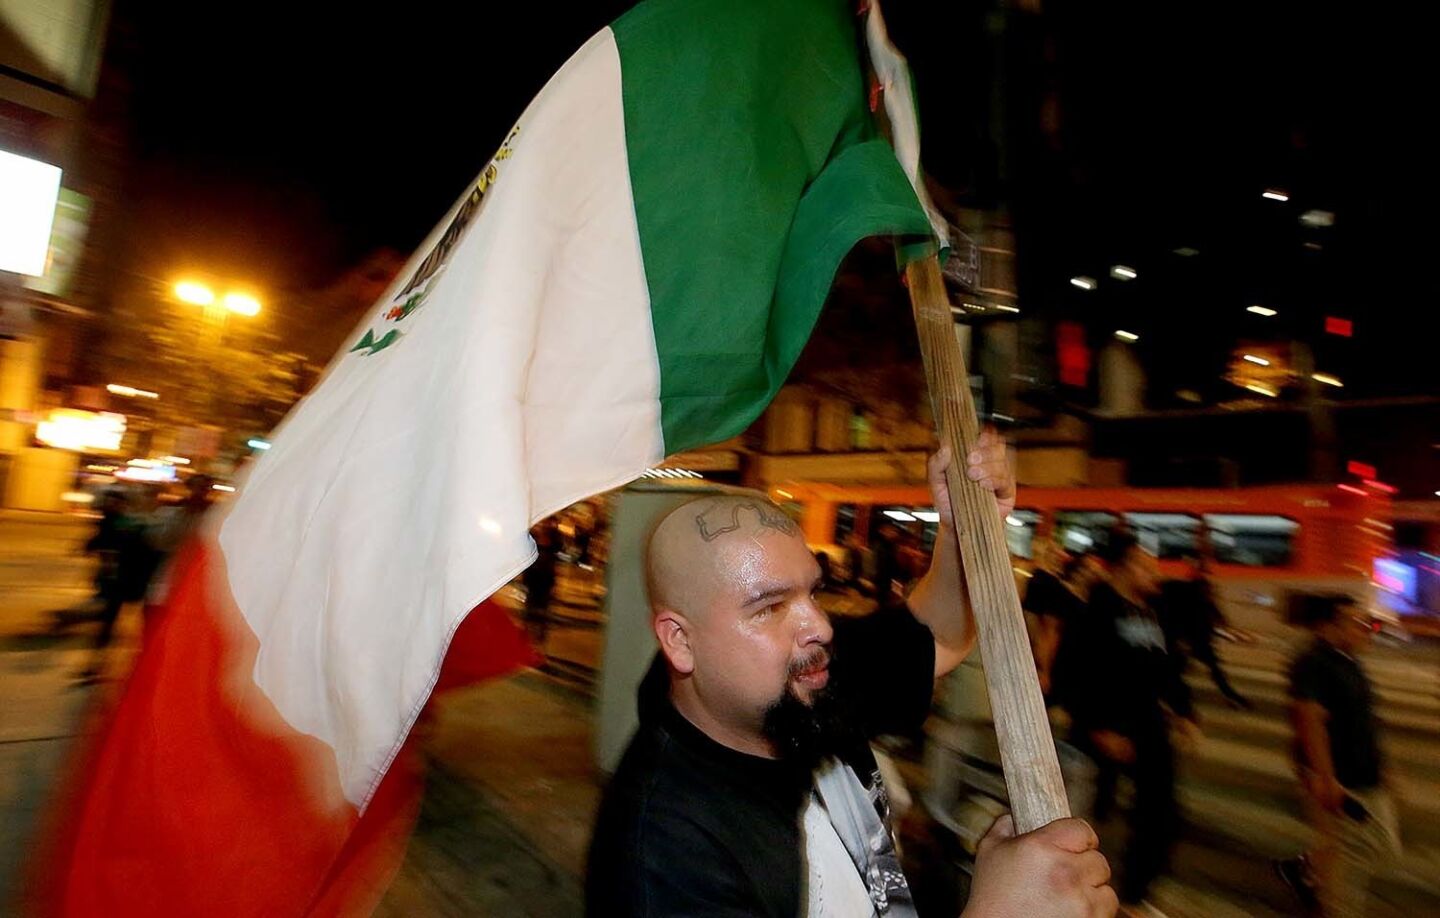 A anti-Trump demonstrator waves a large Mexican flag as protesters on the march snarl traffic in downtown Los Angeles.